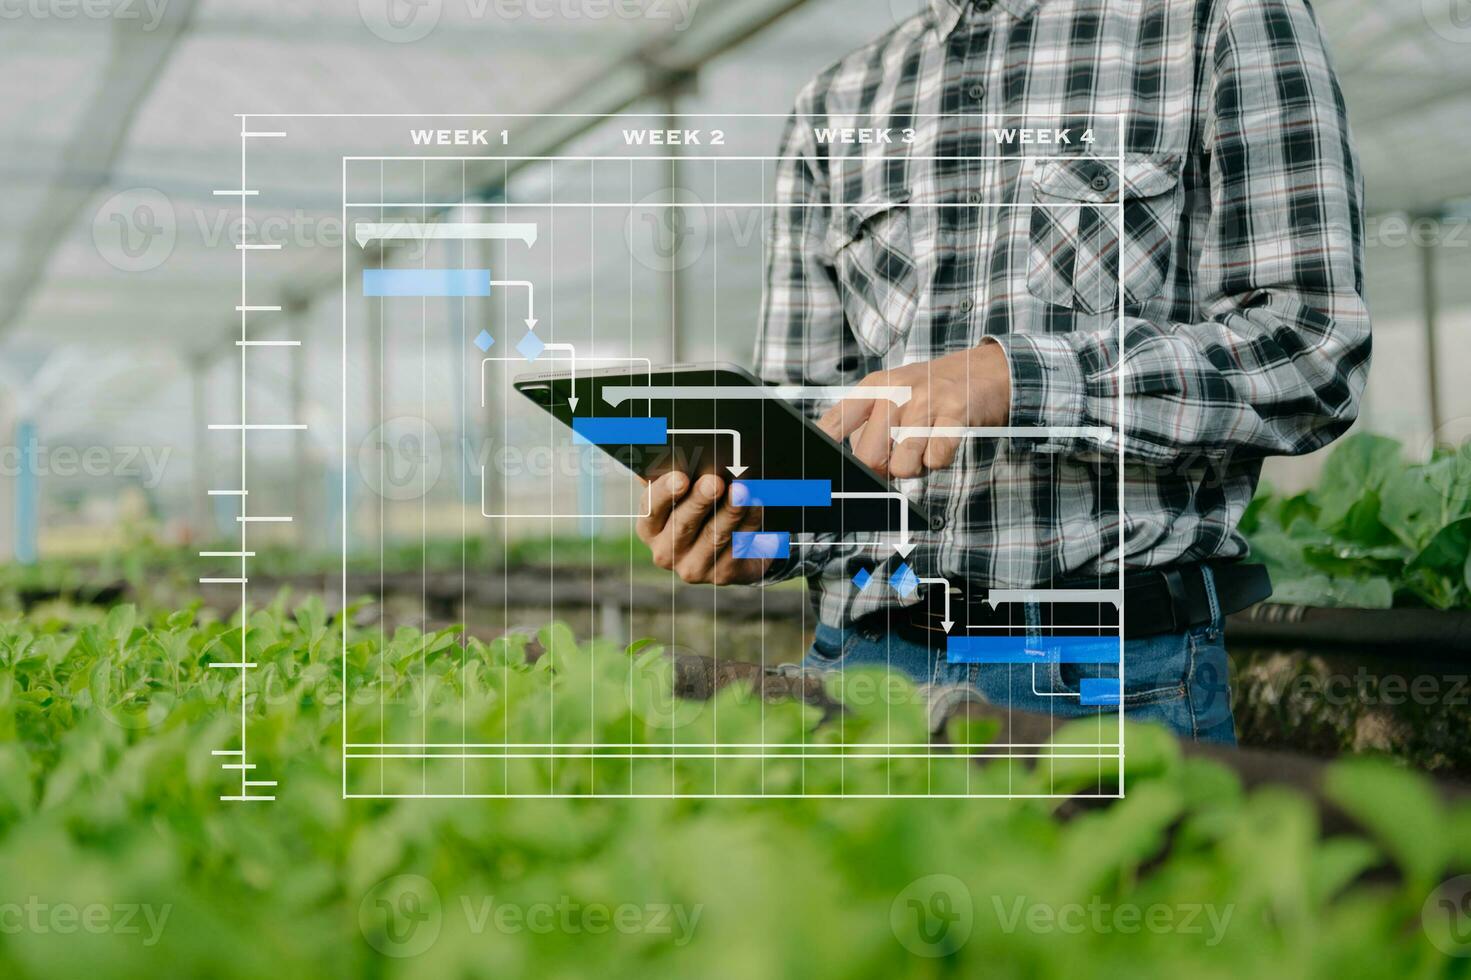 Agriculture technology farmer woman holding tablet or tablet technology to research about agriculture problems analysis data and visual icon.Smart farming photo